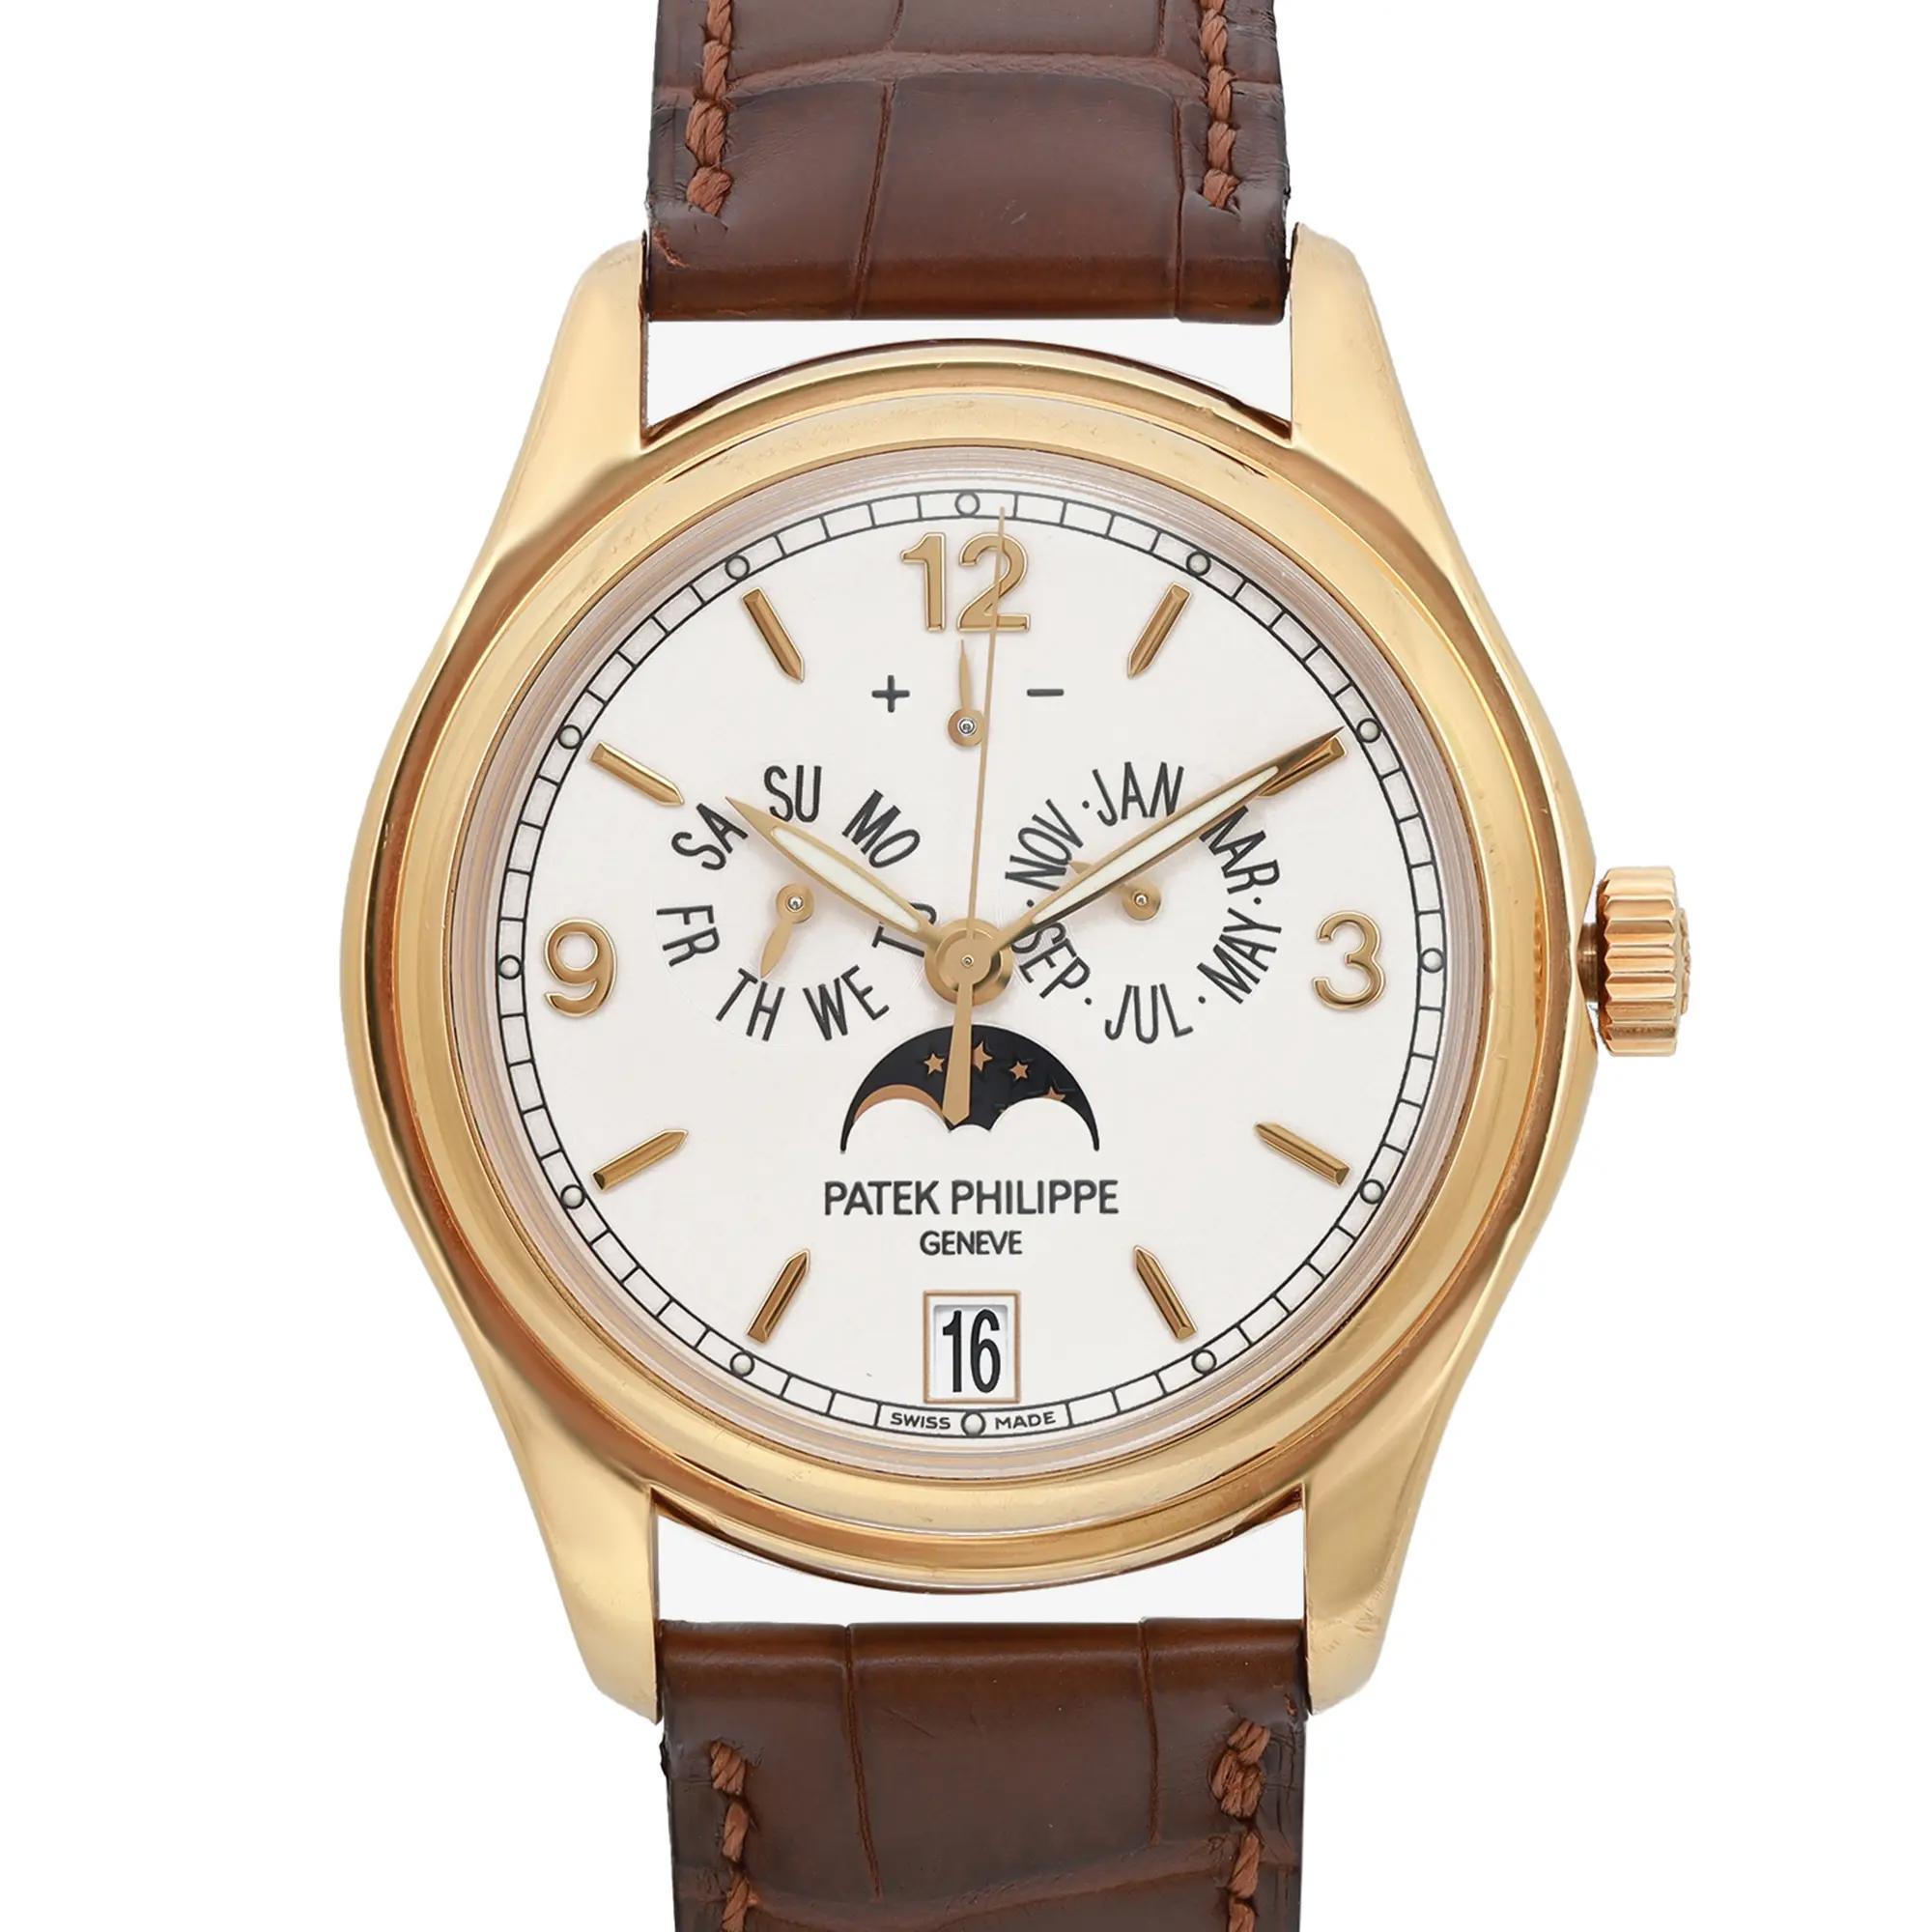 Pre-owned good condition. The band shows signs of wear. 

Brand and Model Information:
Brand: Patek Philippe
Model: Patek Philippe Annual Calendar
Model Number: 5146J-001

Type and Style:
Type: Wristwatch
Style: Luxury
Department: Men
Display: